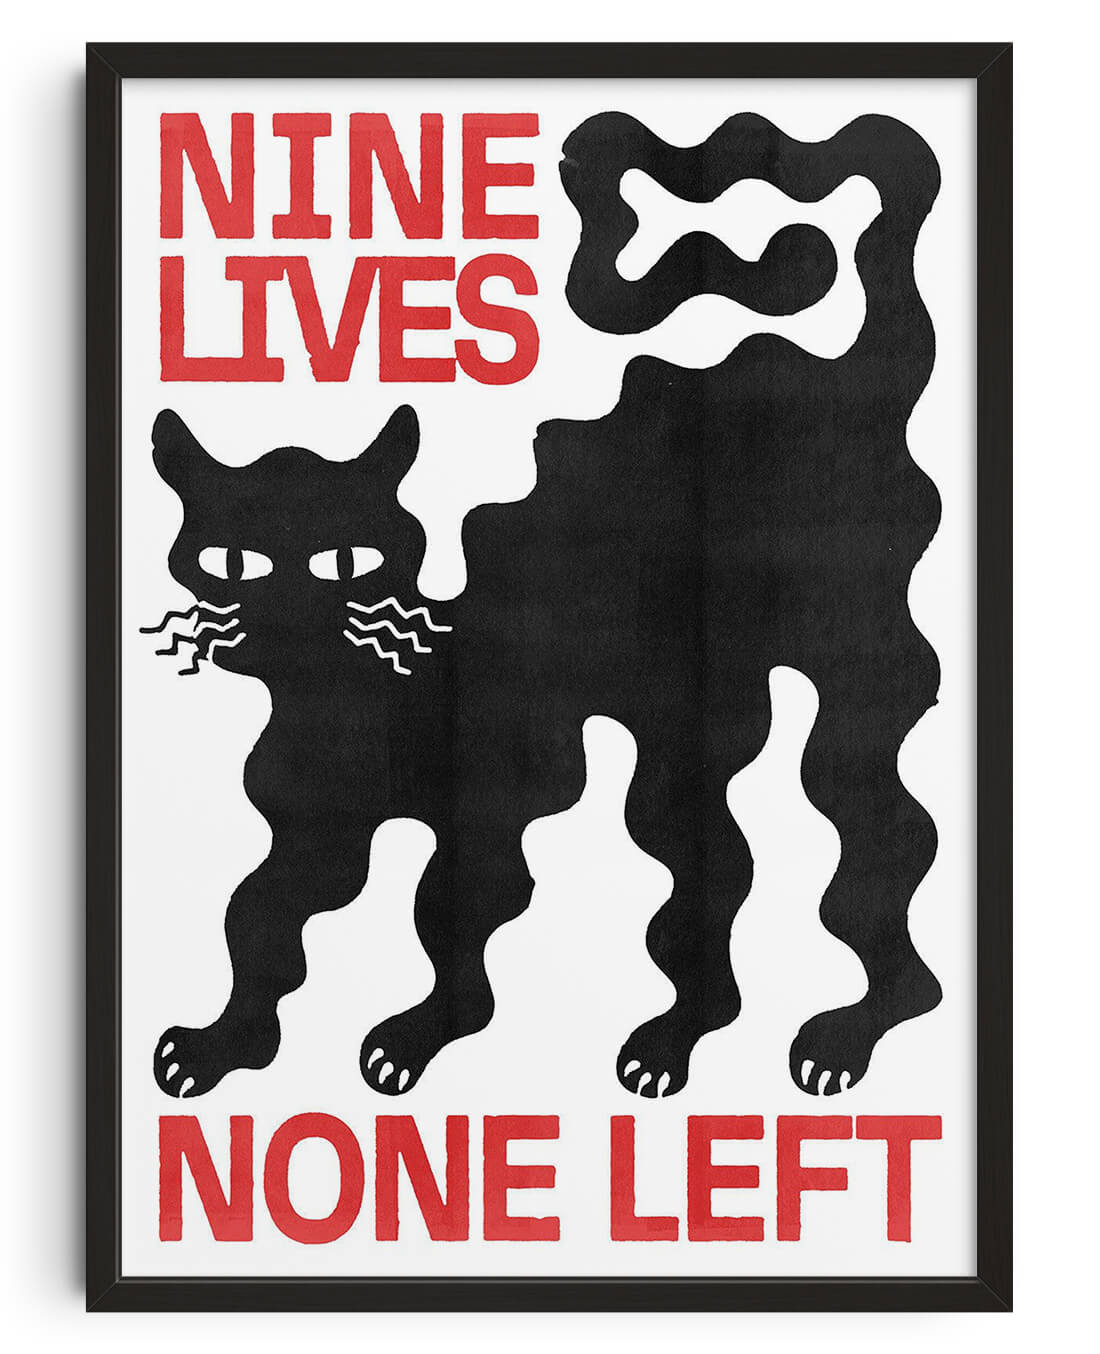 11.7x16.5" (A3) Nine Lives - UNFRAMED contemporary wall art print by Alexander Khabbazi - sold by DROOL